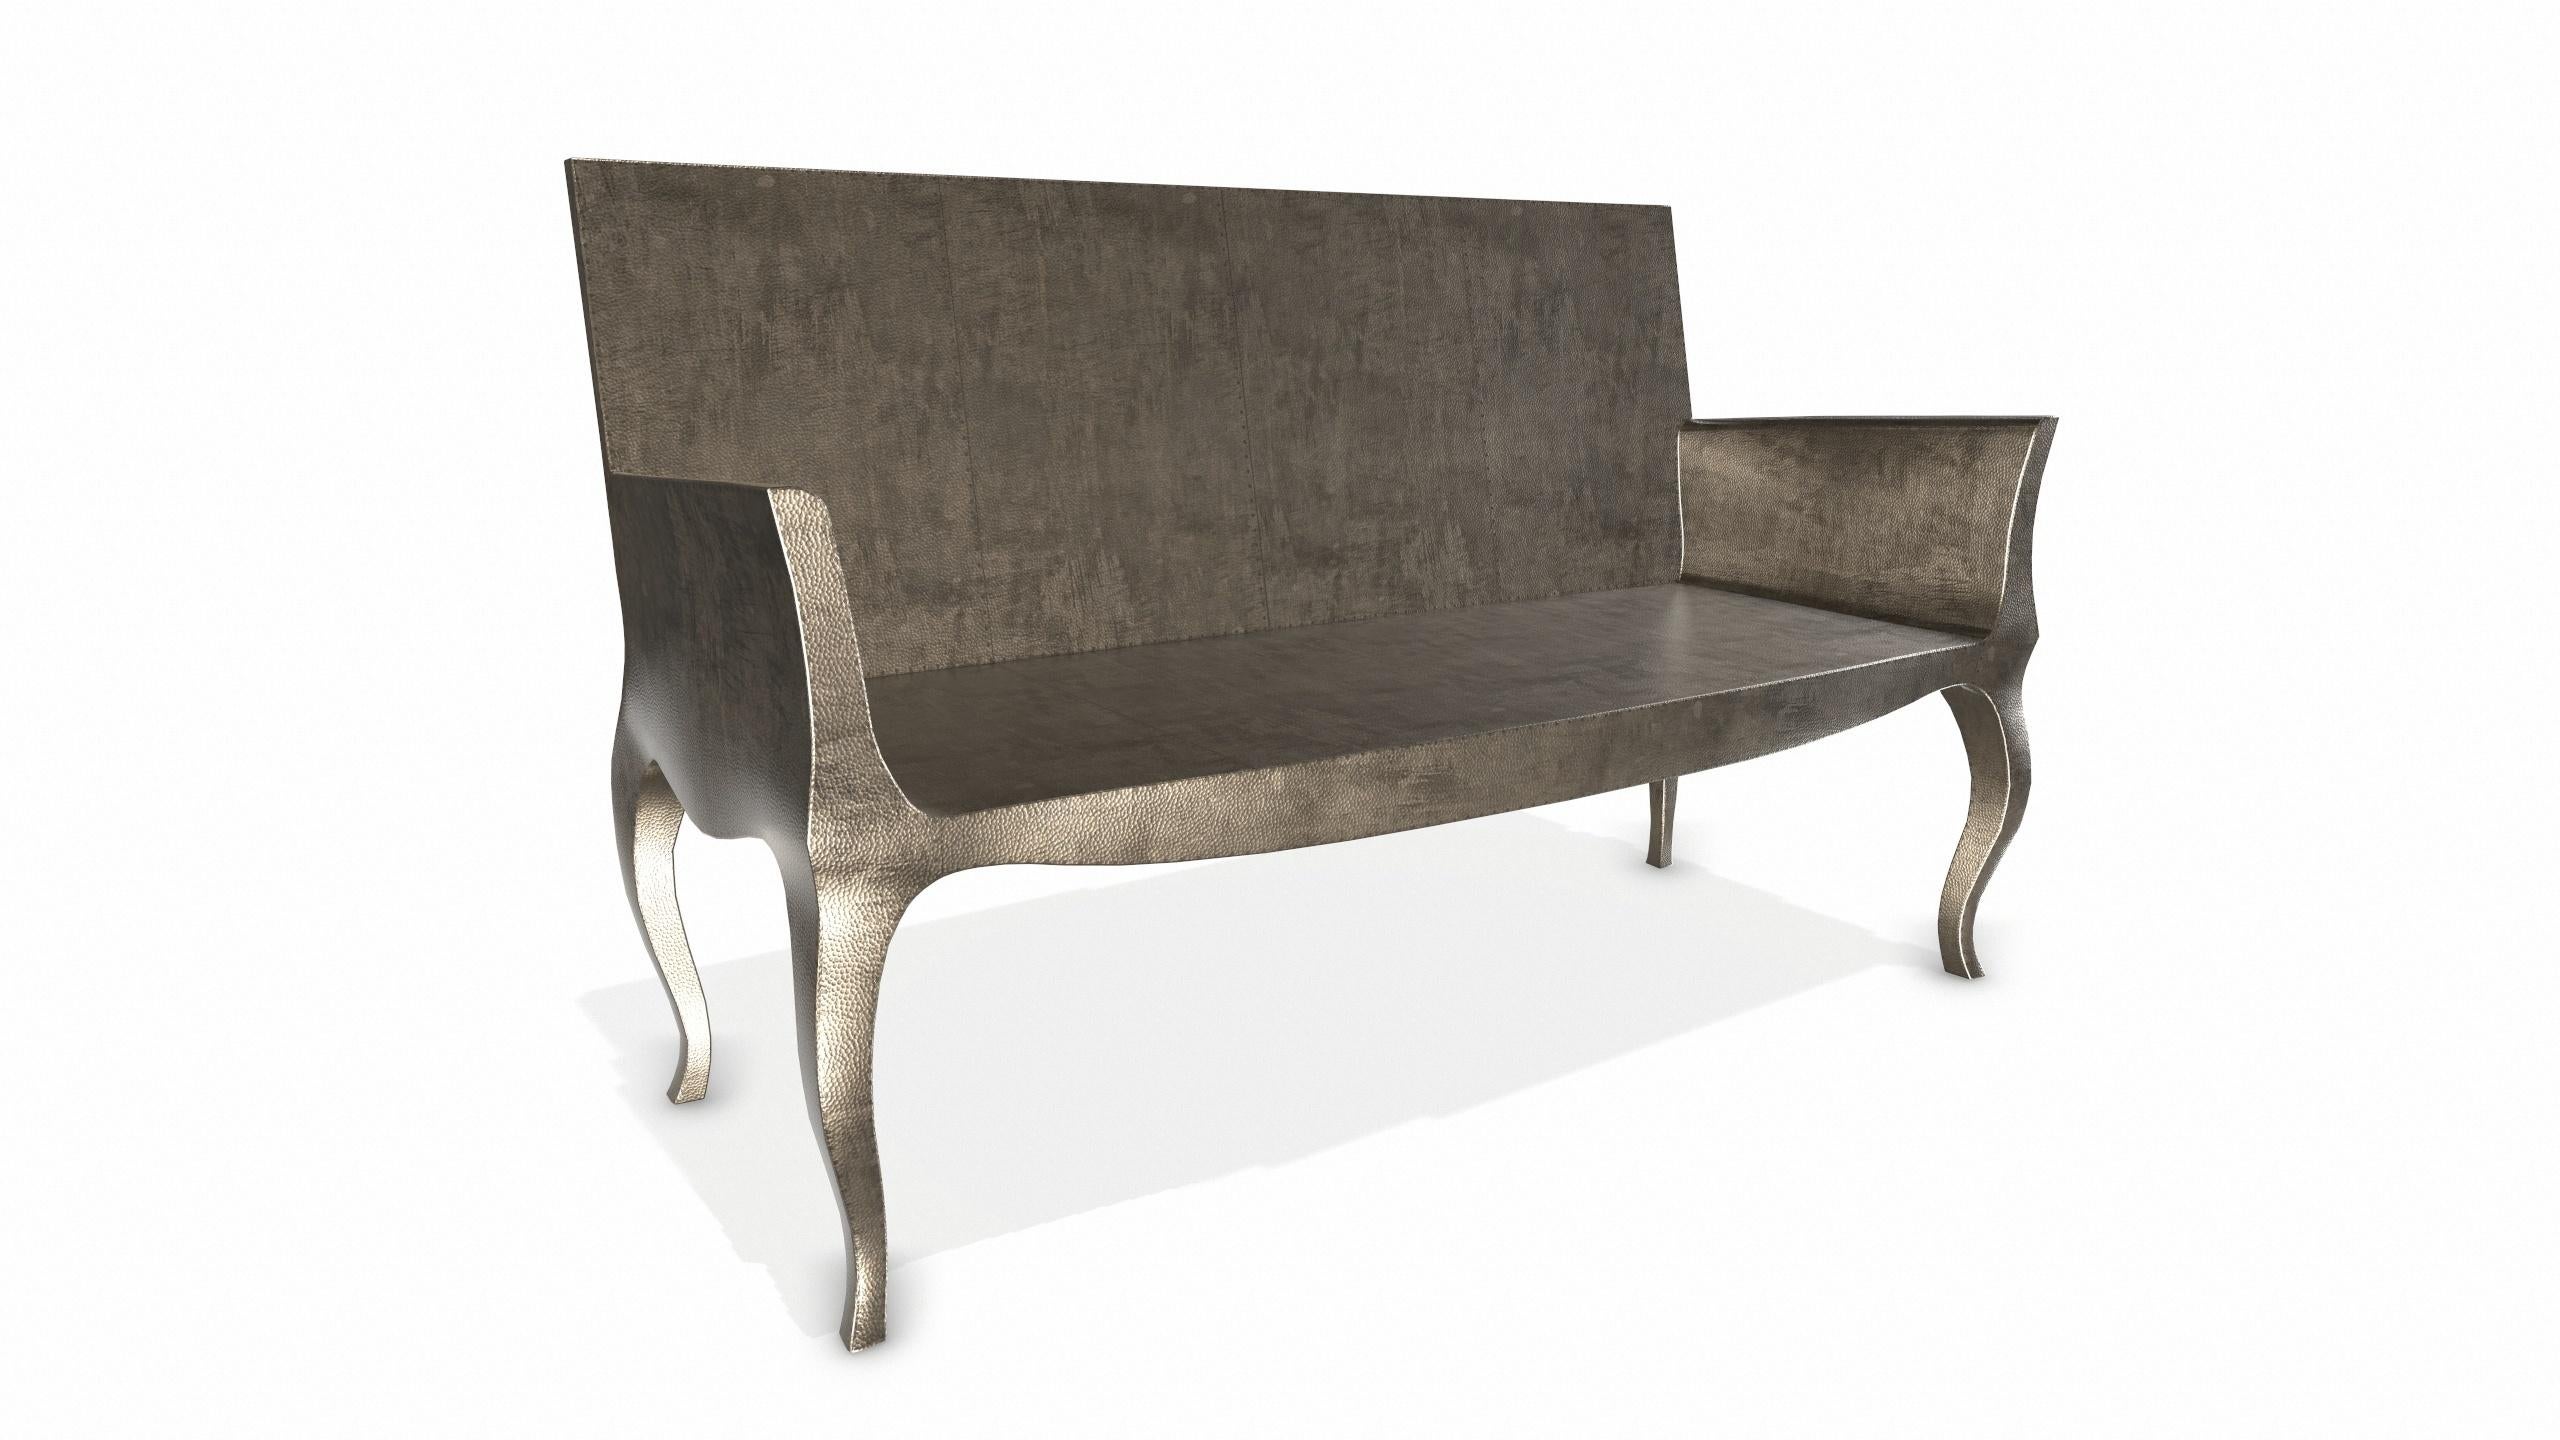 Contemporary Louise Settee Art Deco Canapes in Mid. Hammered Antique Bronze by Paul Mathieu For Sale